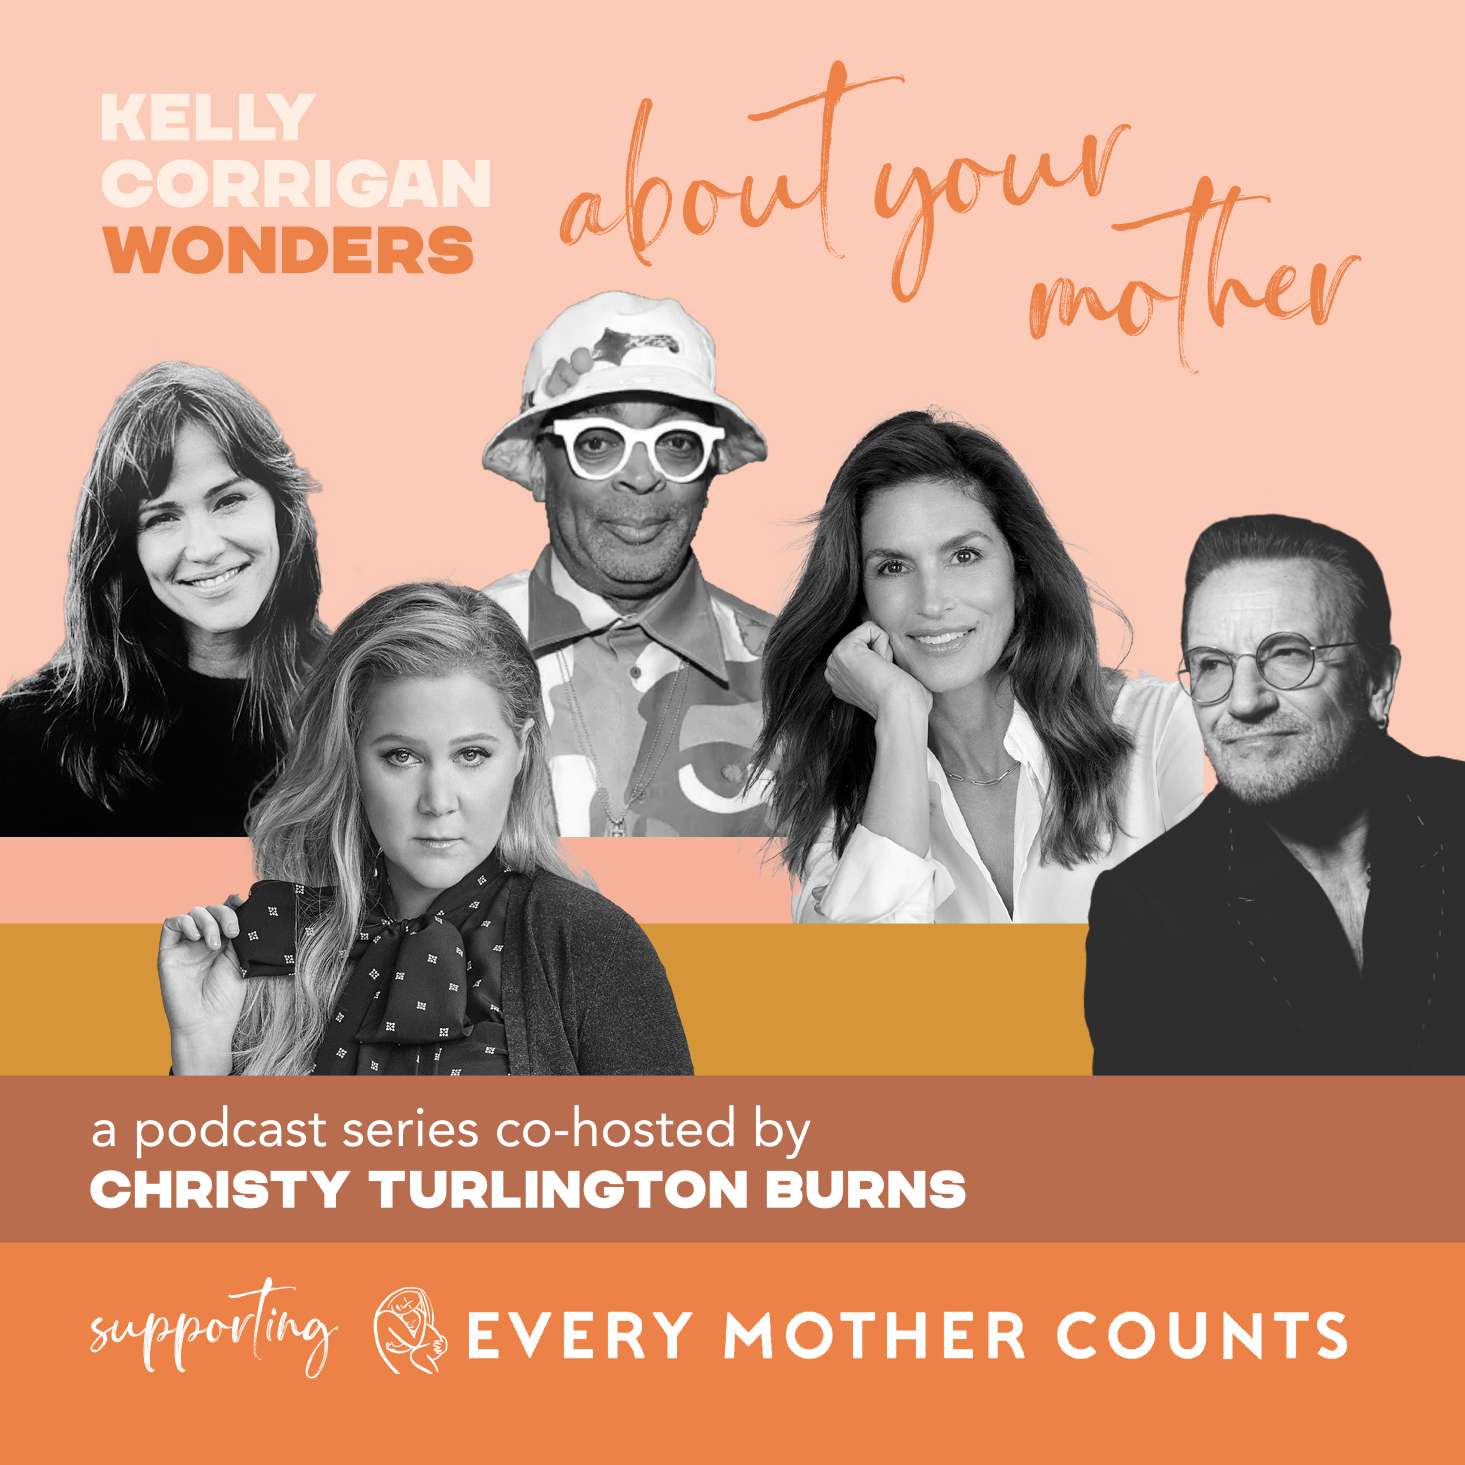 Kelly Corrigan Wonders About Your Mother, podcast co-hosted by Christy Turlington Burns